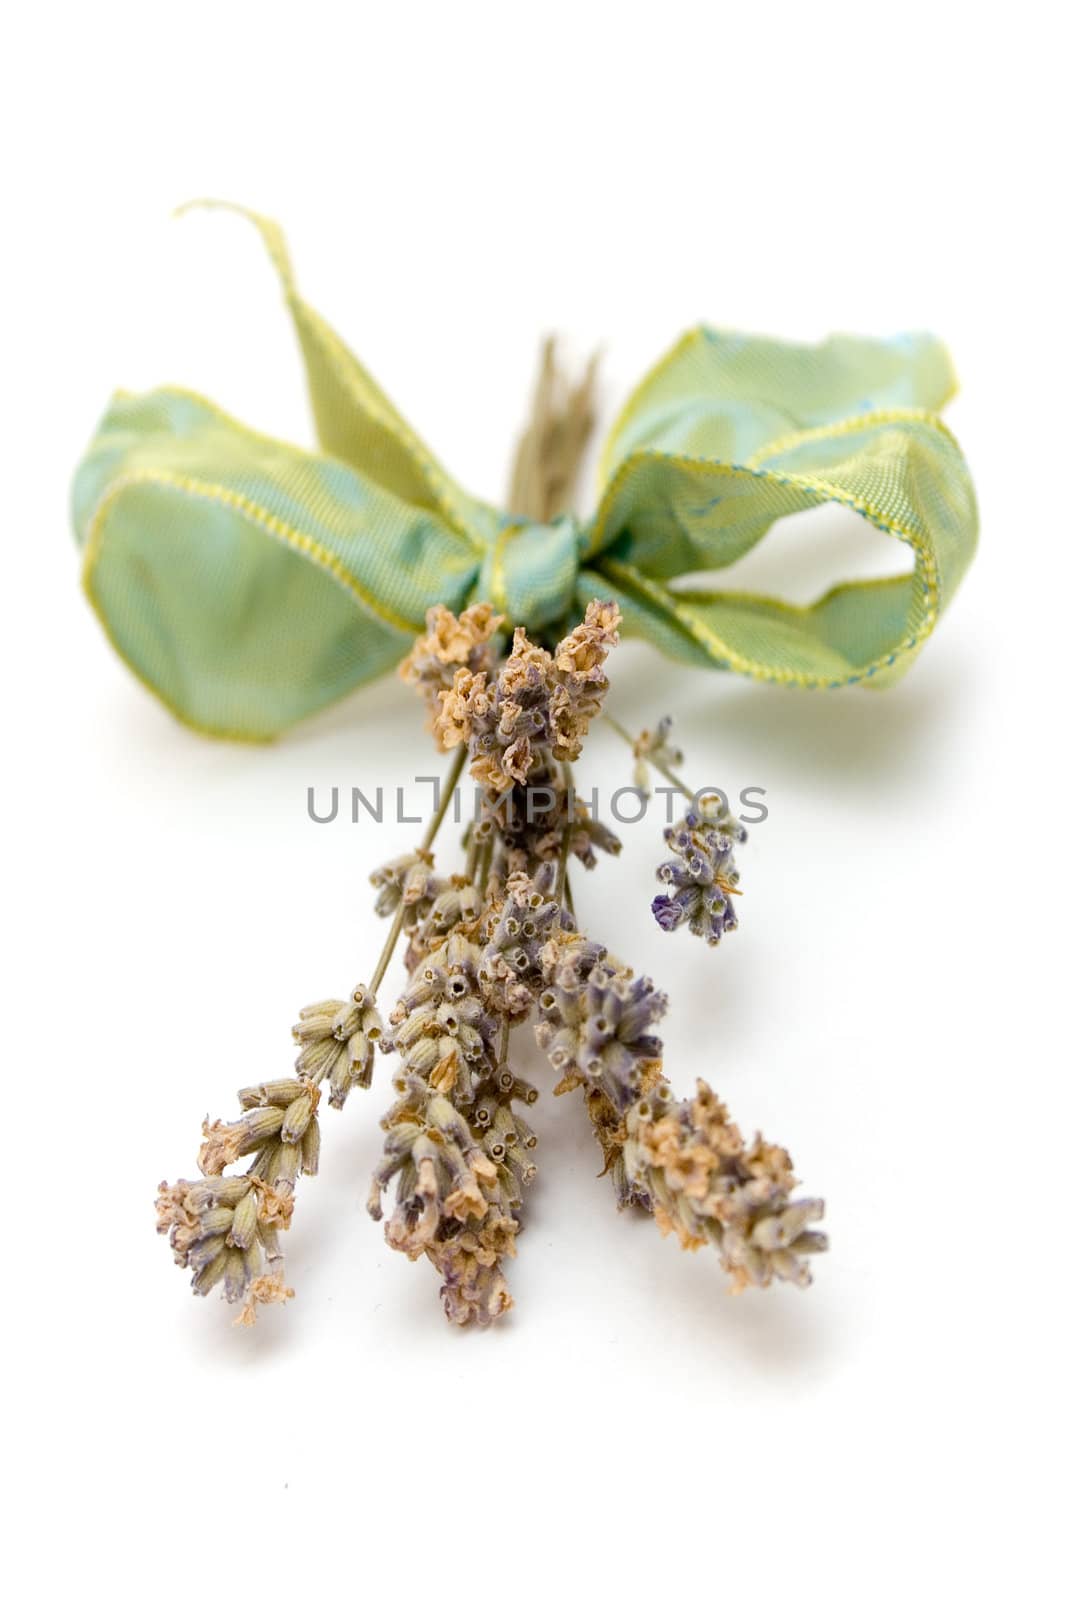 Decorative bunch of dried aromatic lavender isolated on a white background. Shallow depth of field.